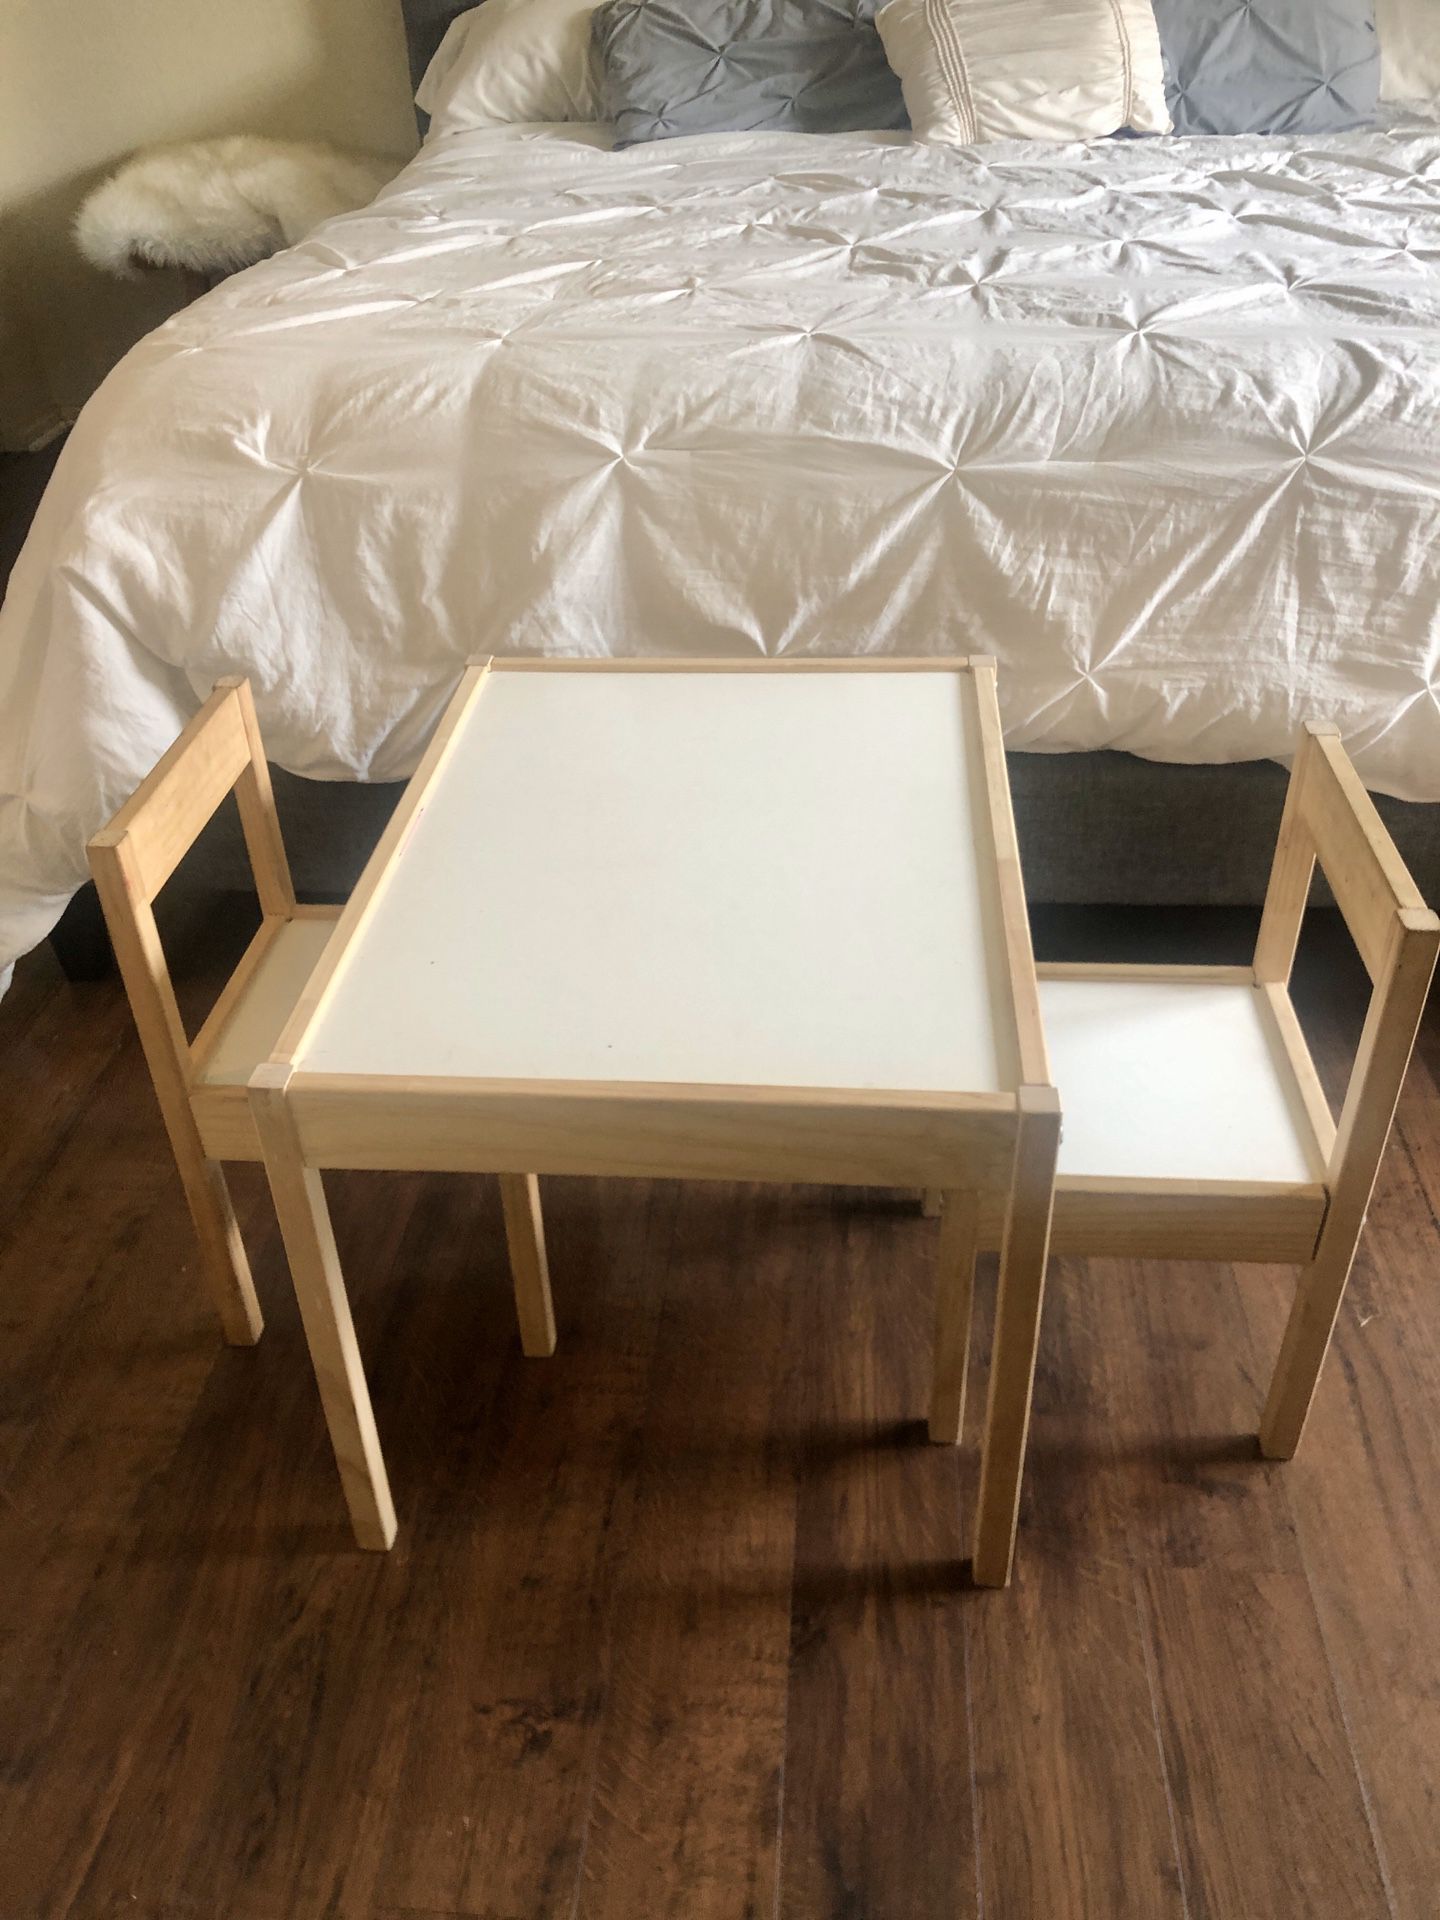 Ikea kids table for toddlers with 2 chairs